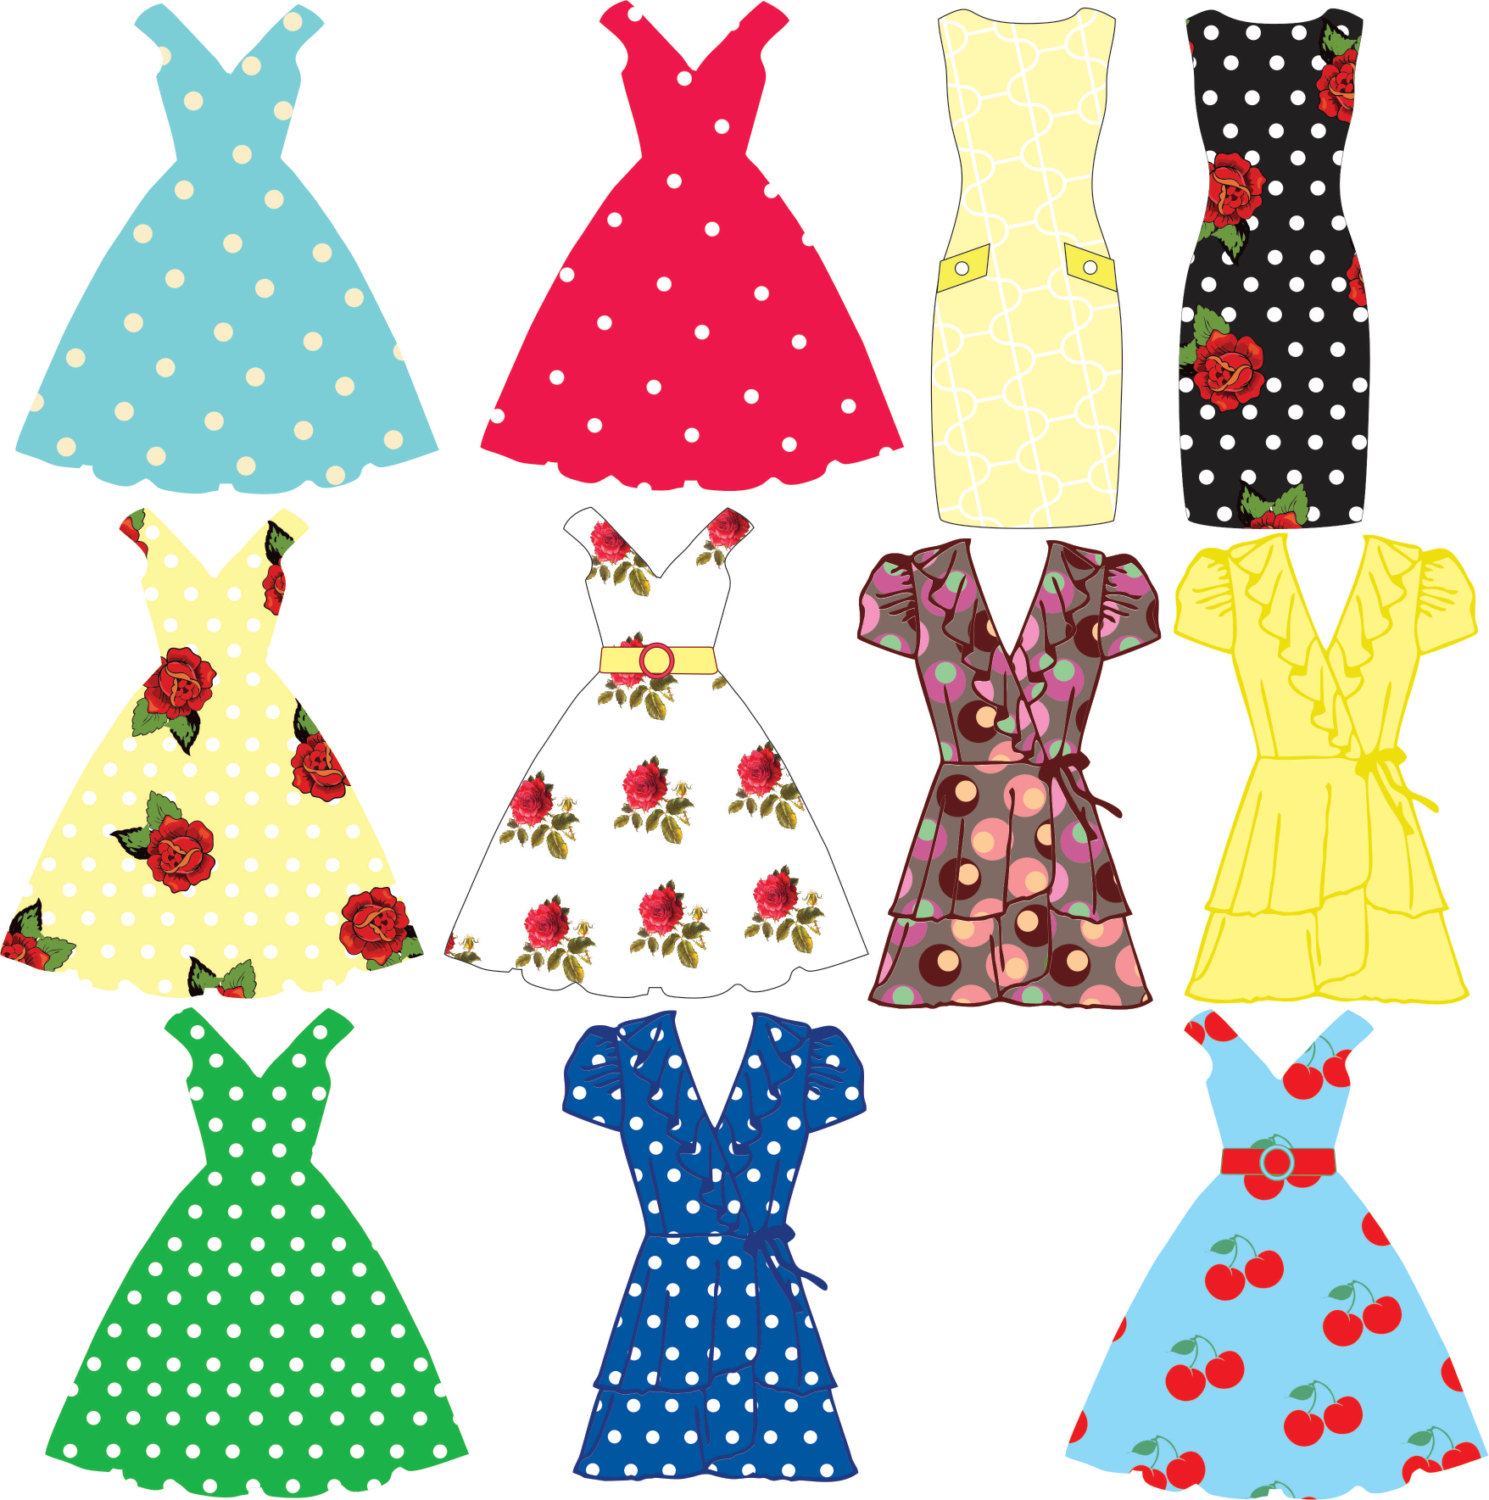 clipart of a dress - photo #33